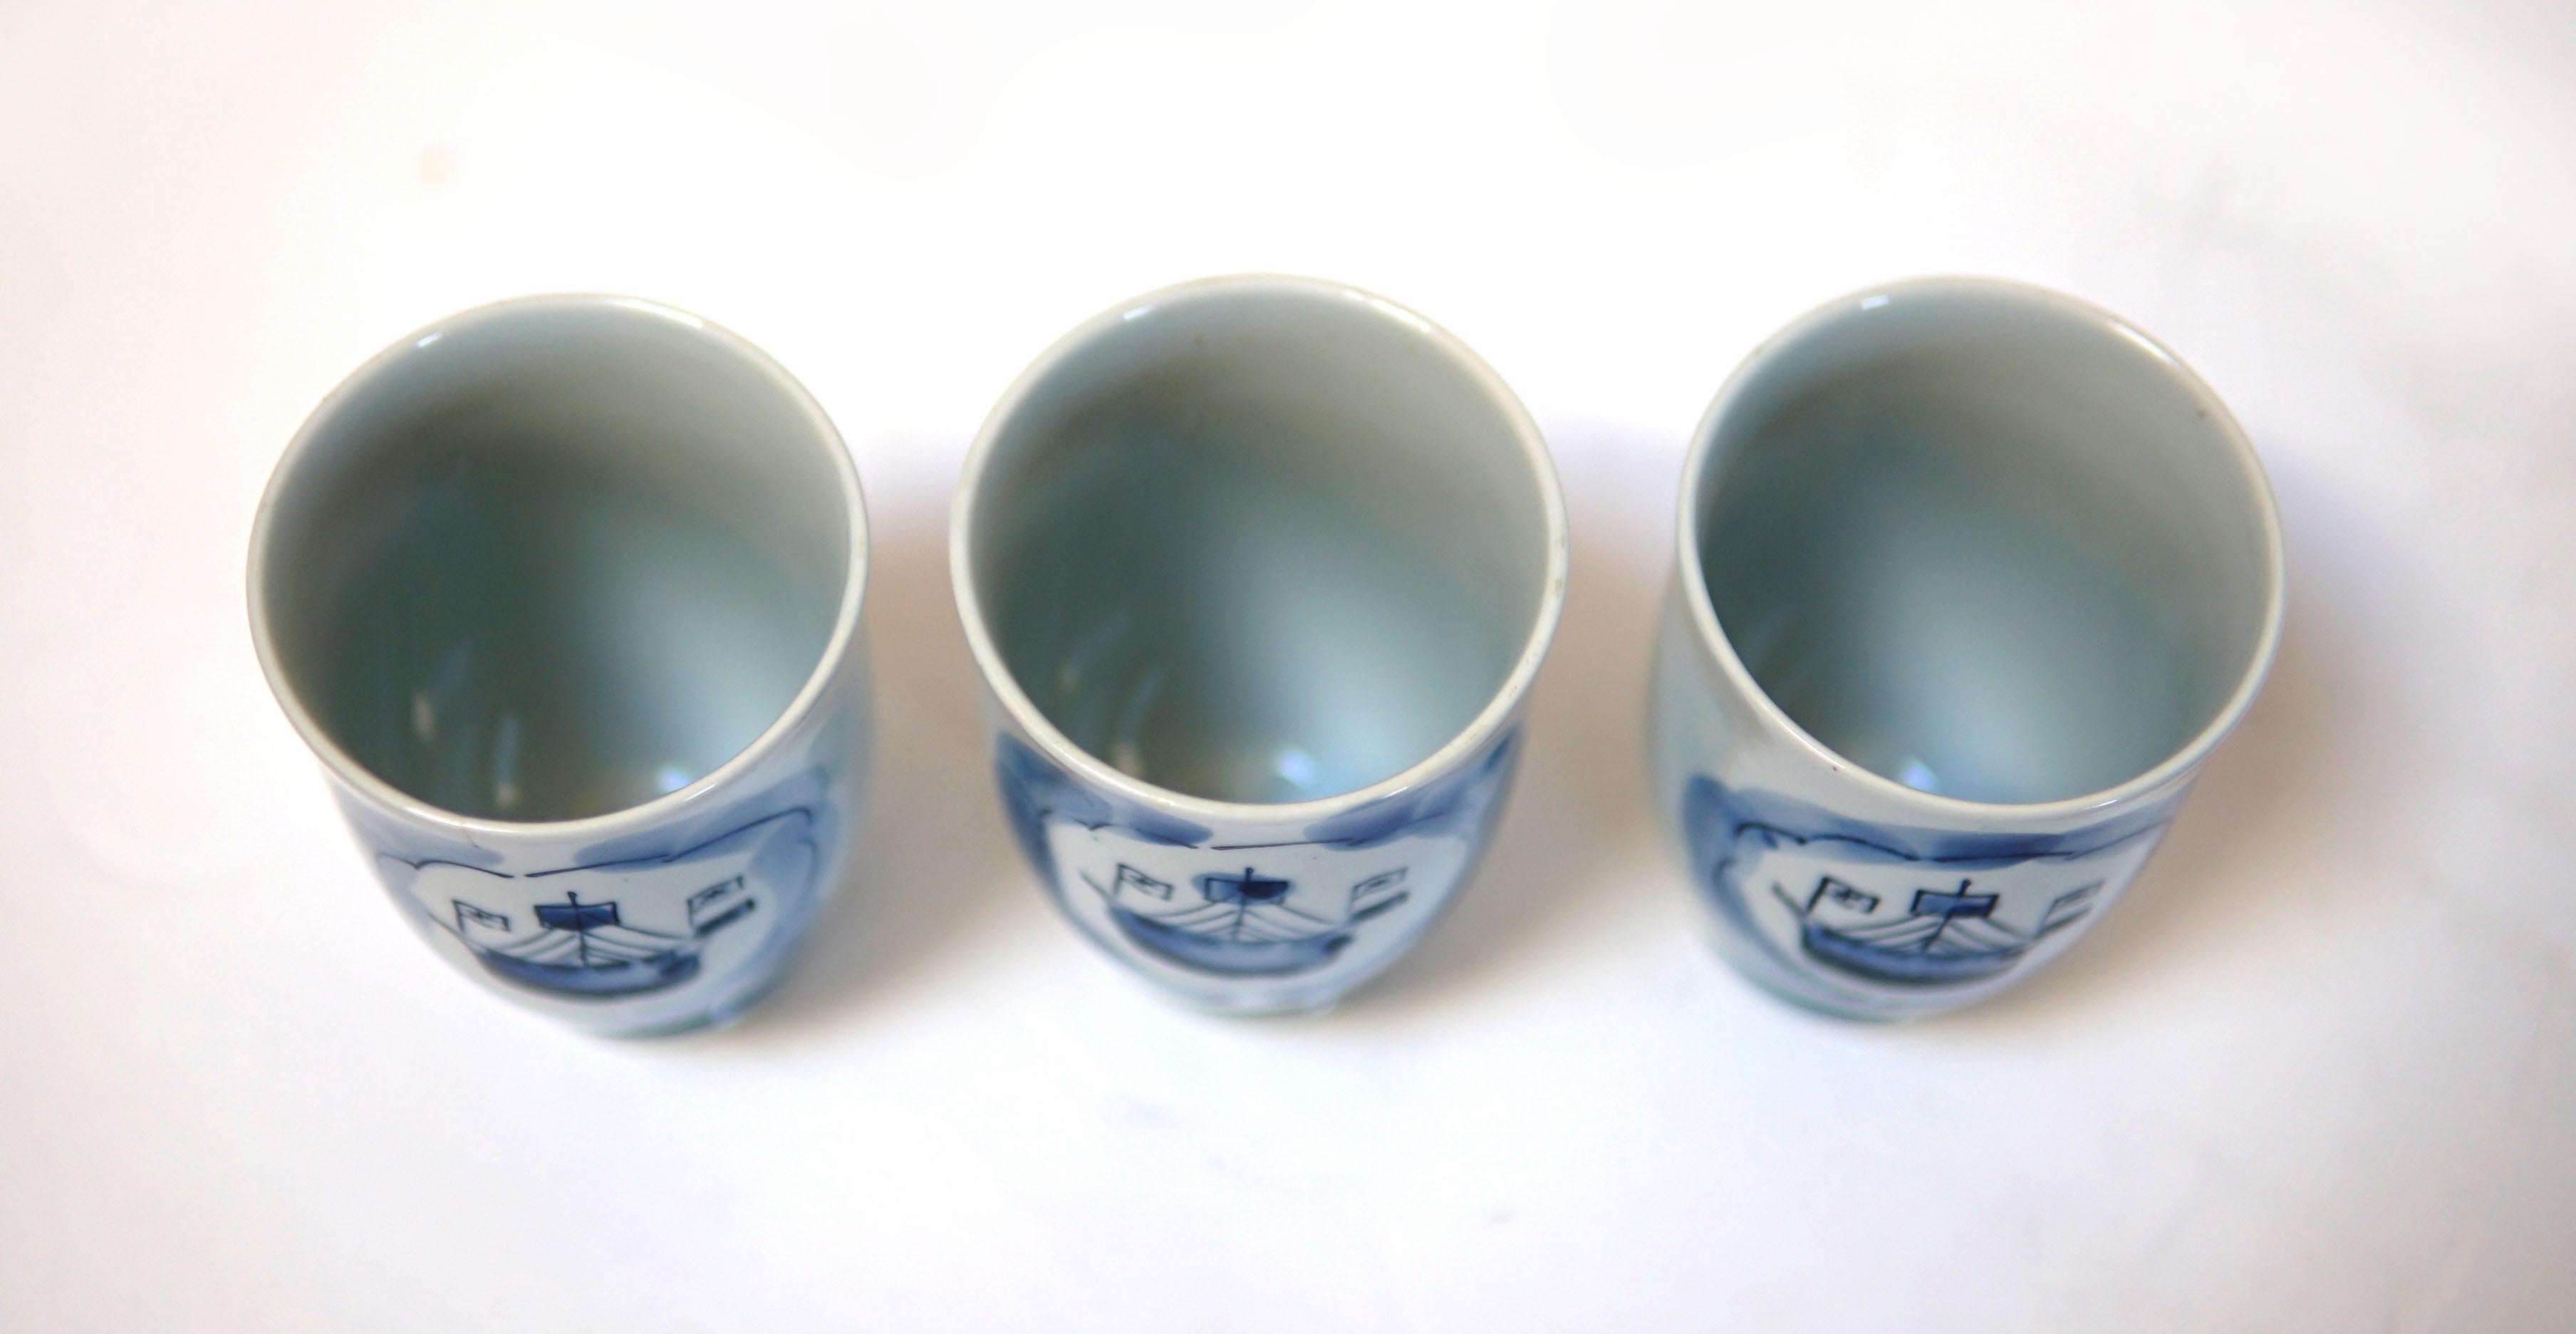 Yi Feng Studio Blue and White Porcelain Tea Cups Nautical Hand Painted Theme For Sale 2